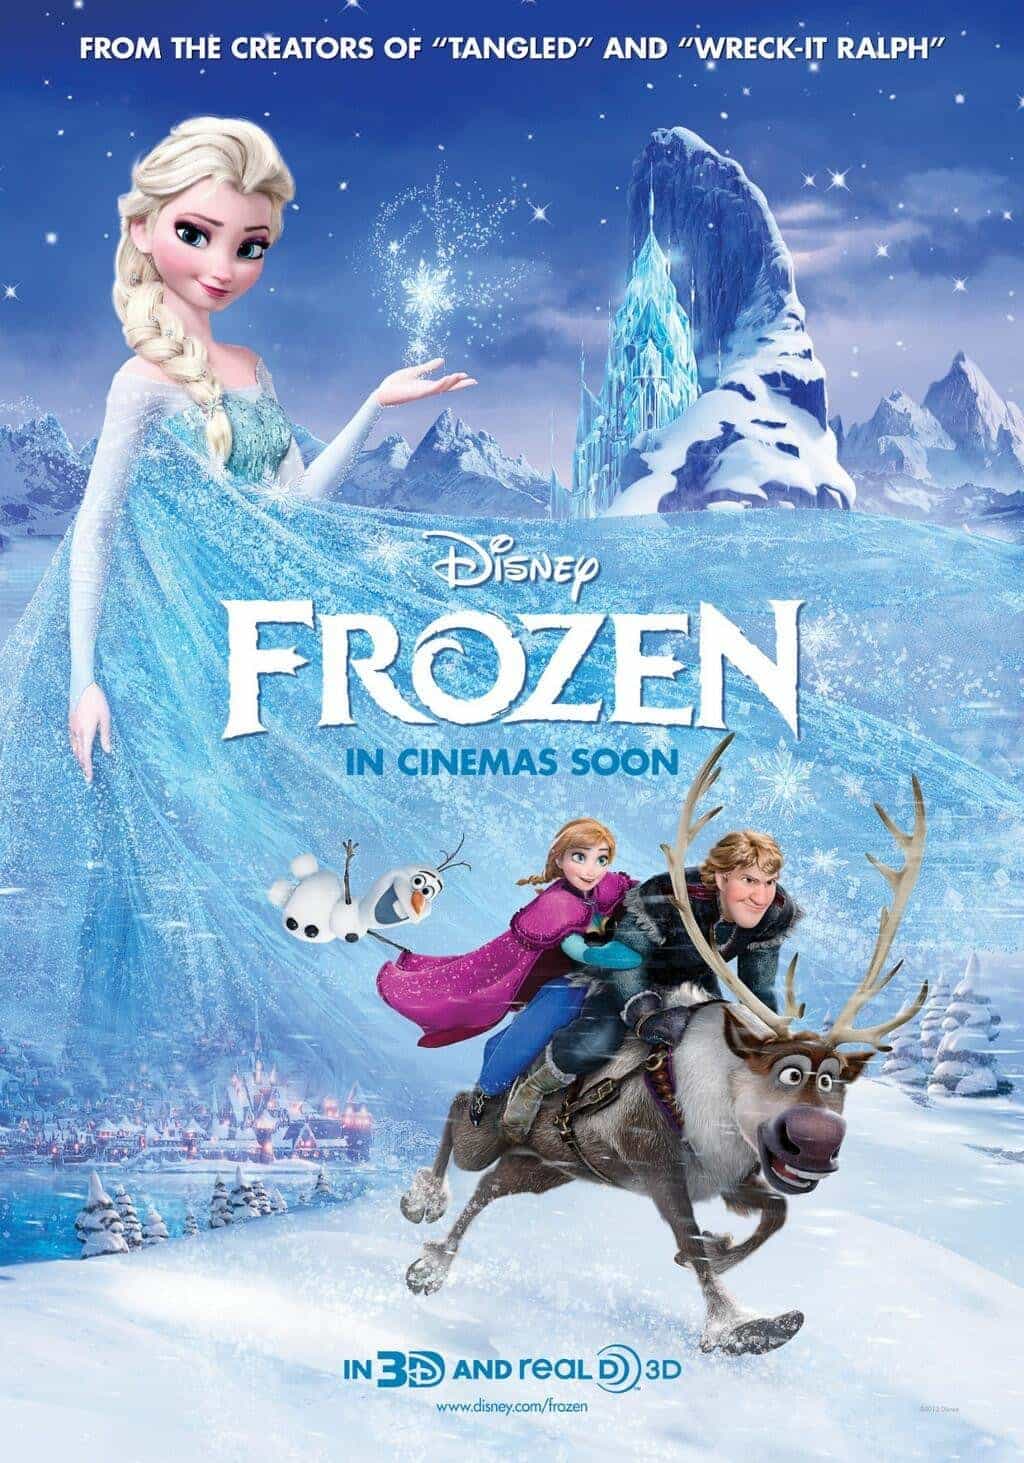 UK home entertainment charts report 11th May:  Frozen goes back up to the top